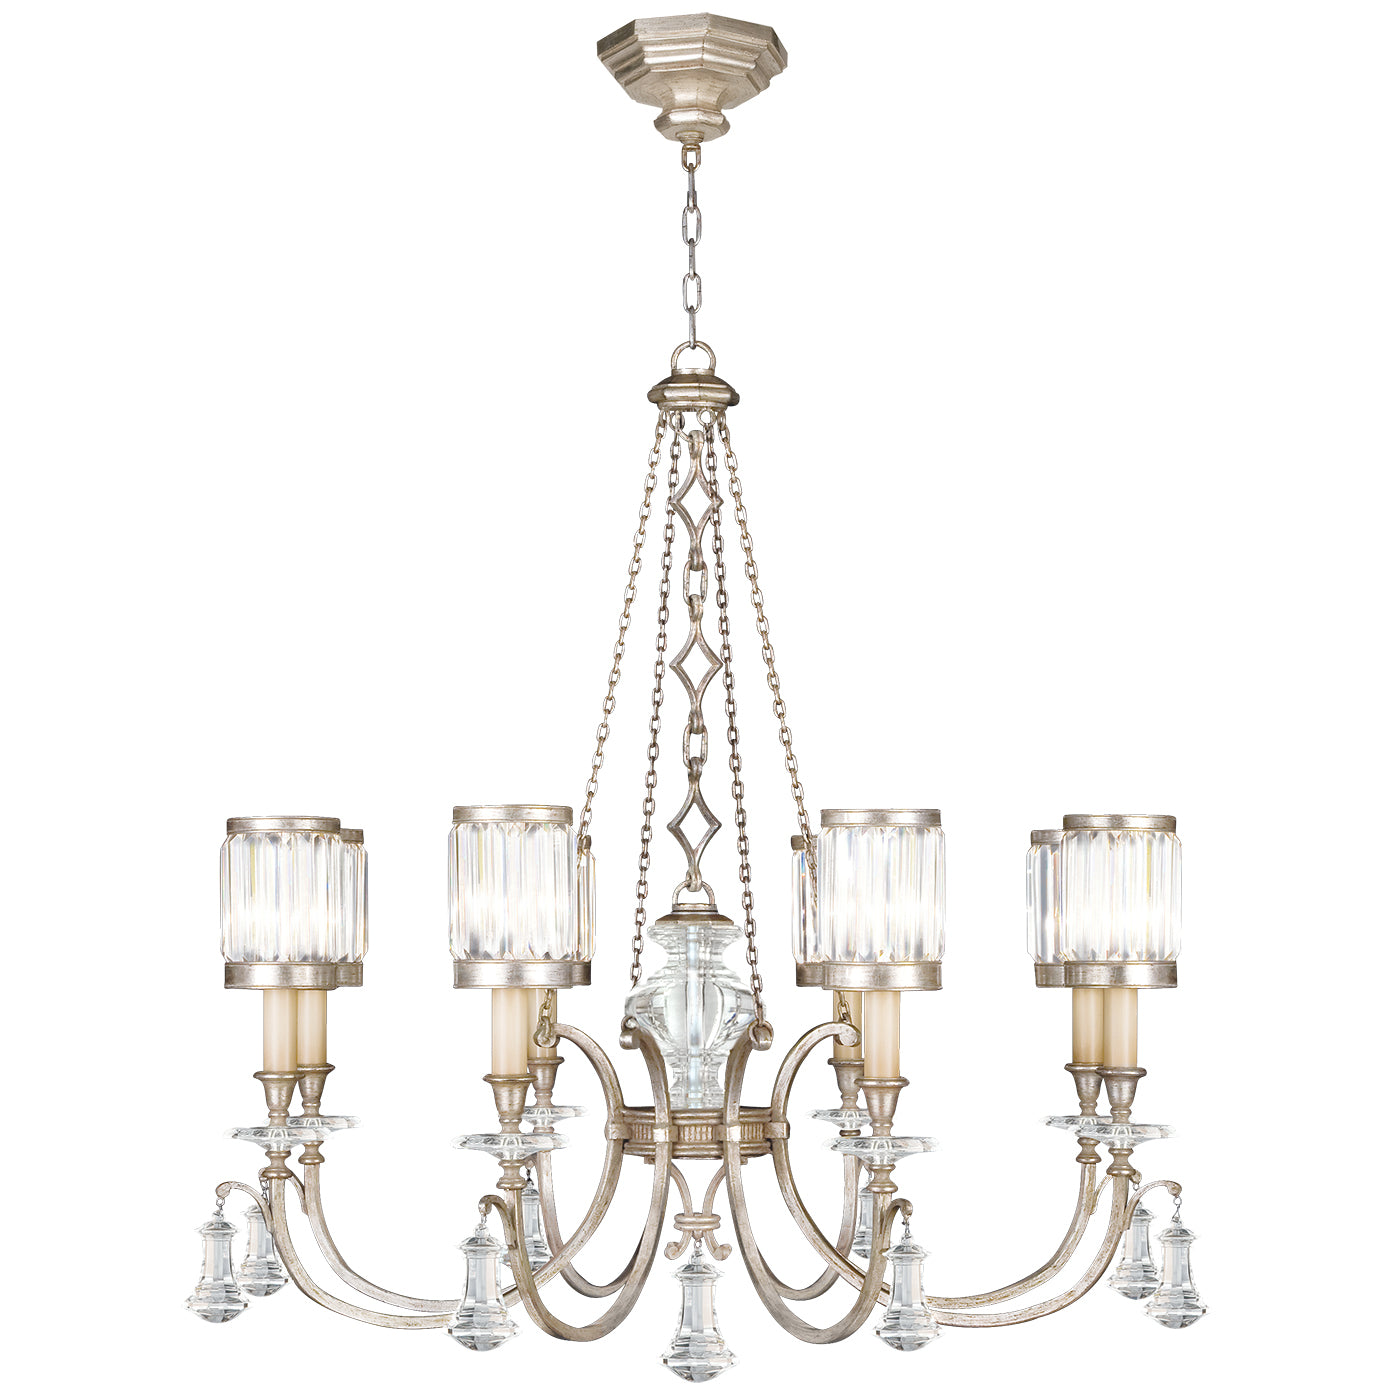 Fine Art Handcrafted Lighting Eaton Place Chandelier Chandeliers Fine Art Handcrafted Lighting Silver 43 x 42 